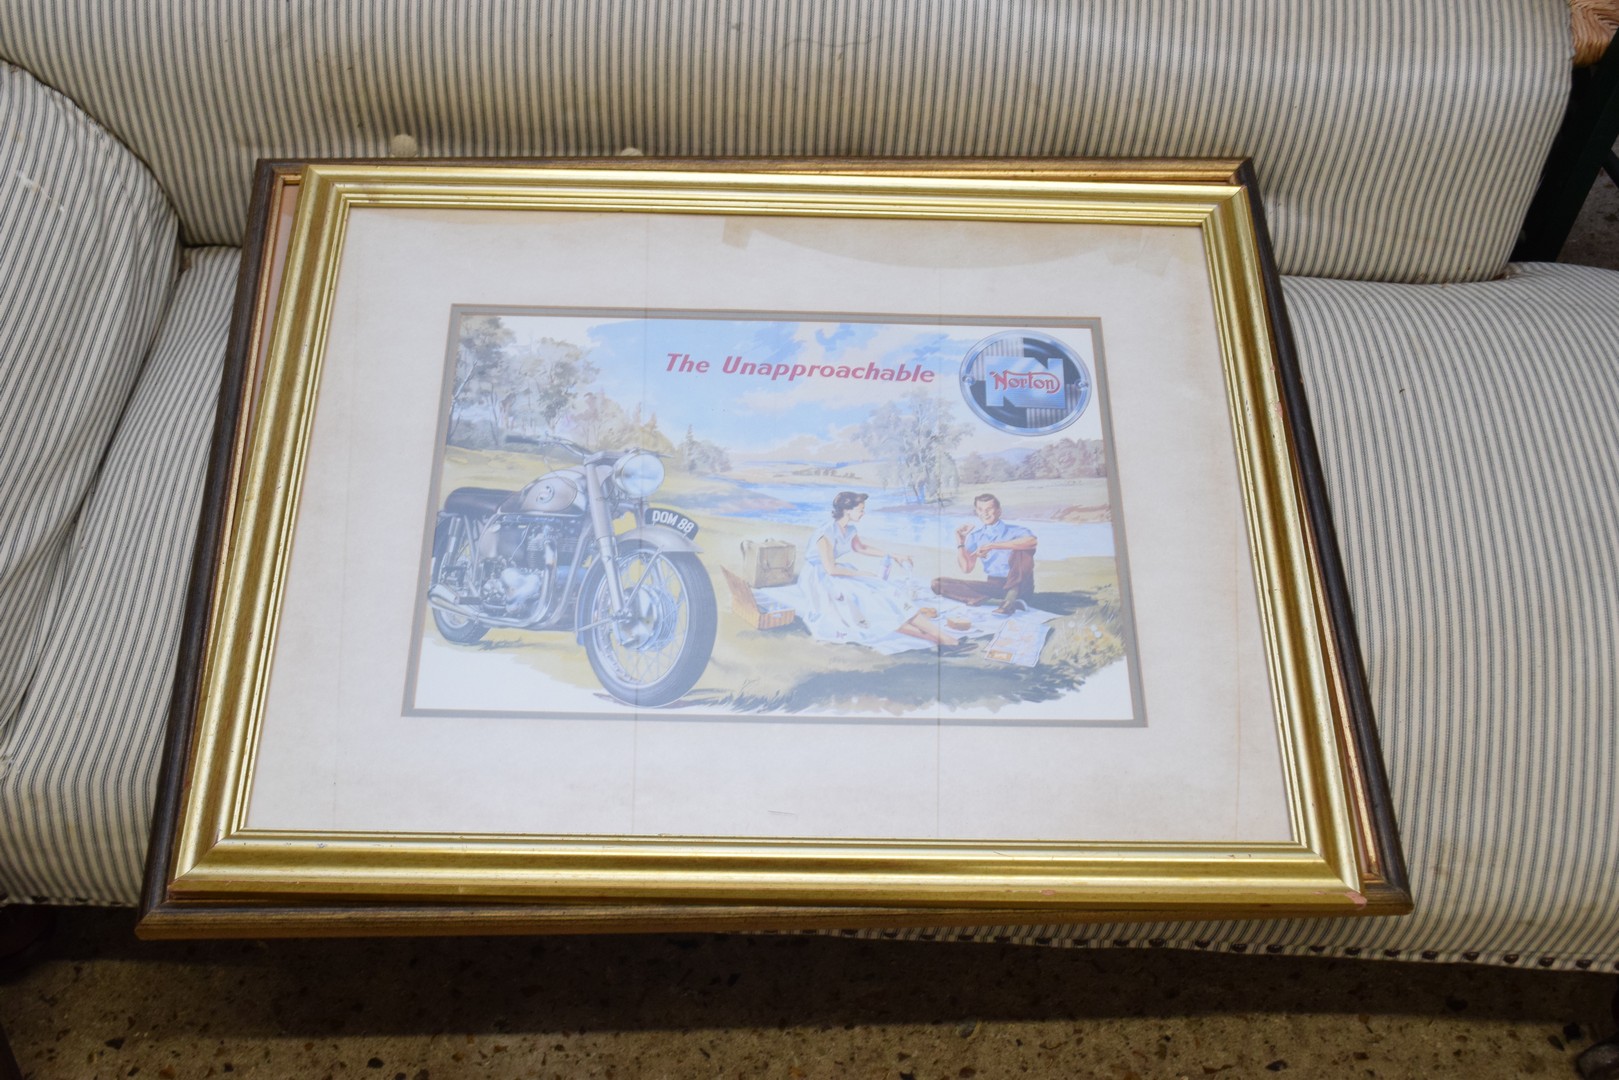 MOTORCYCLE INTEREST, A BSA SERVICE CHART TOGETHER WITH A NORTON MOTORCYCLE ADVERTISING PRINT, BOTH - Image 2 of 3